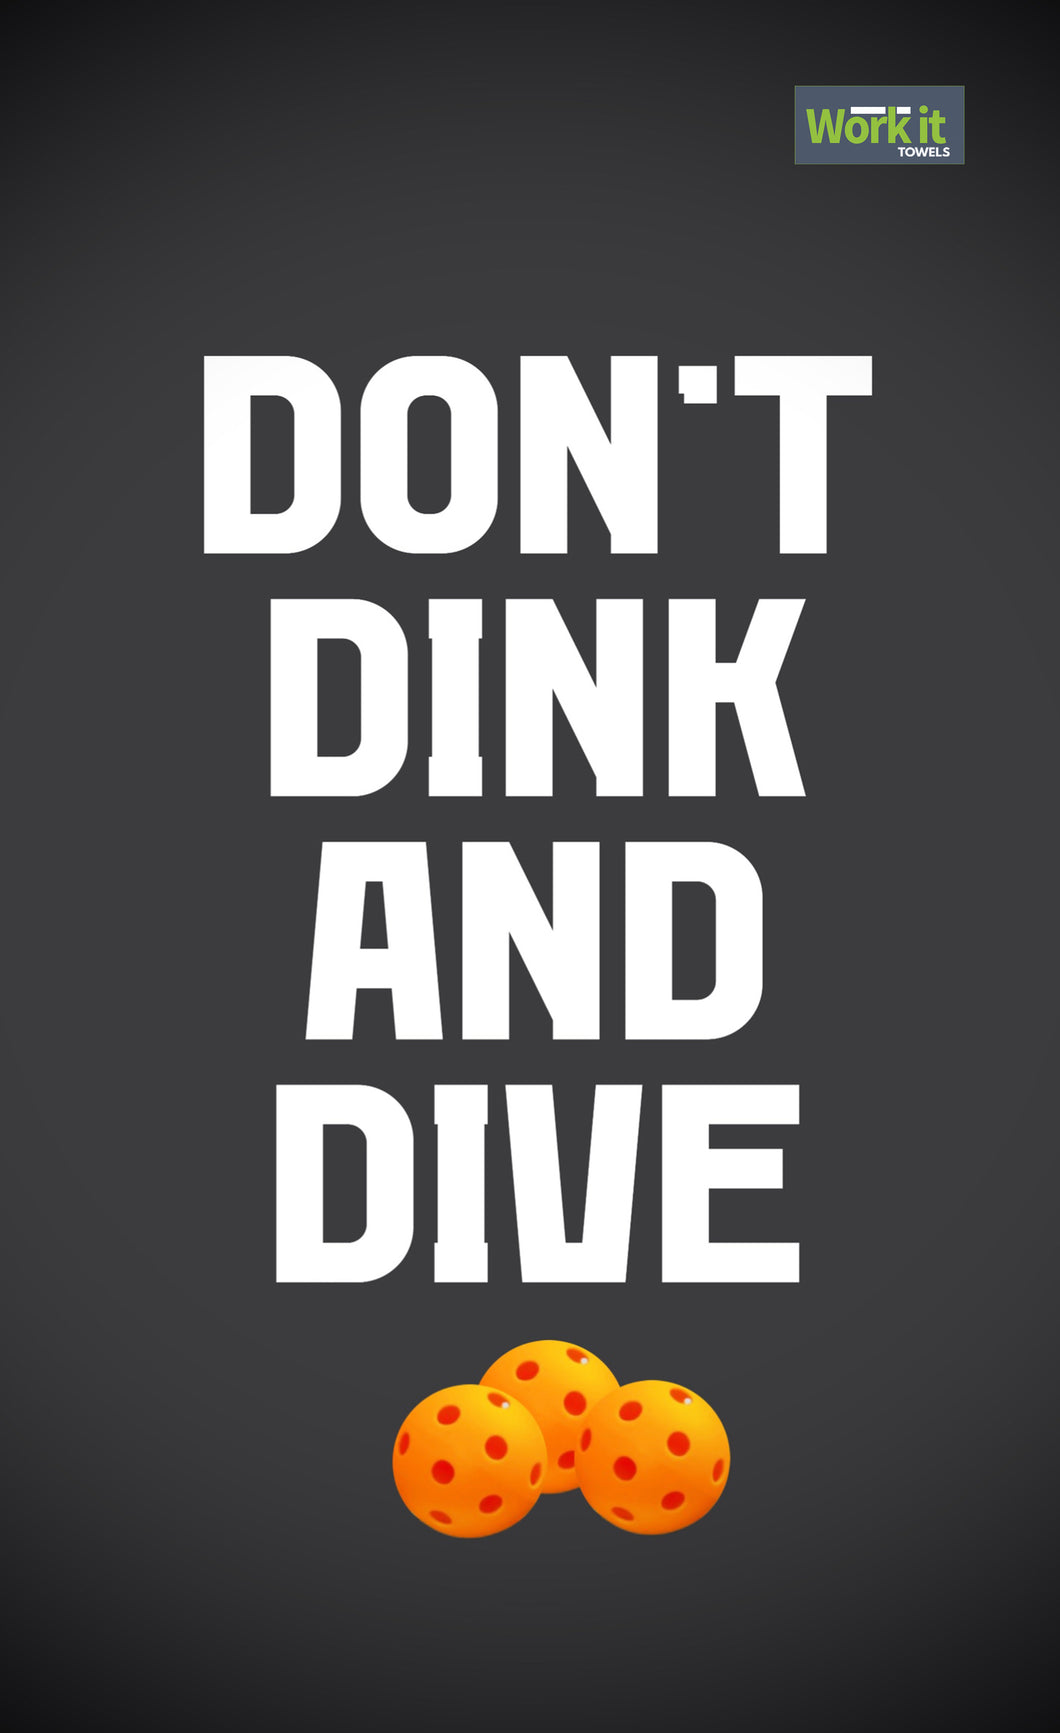 Don't Dink and Dive